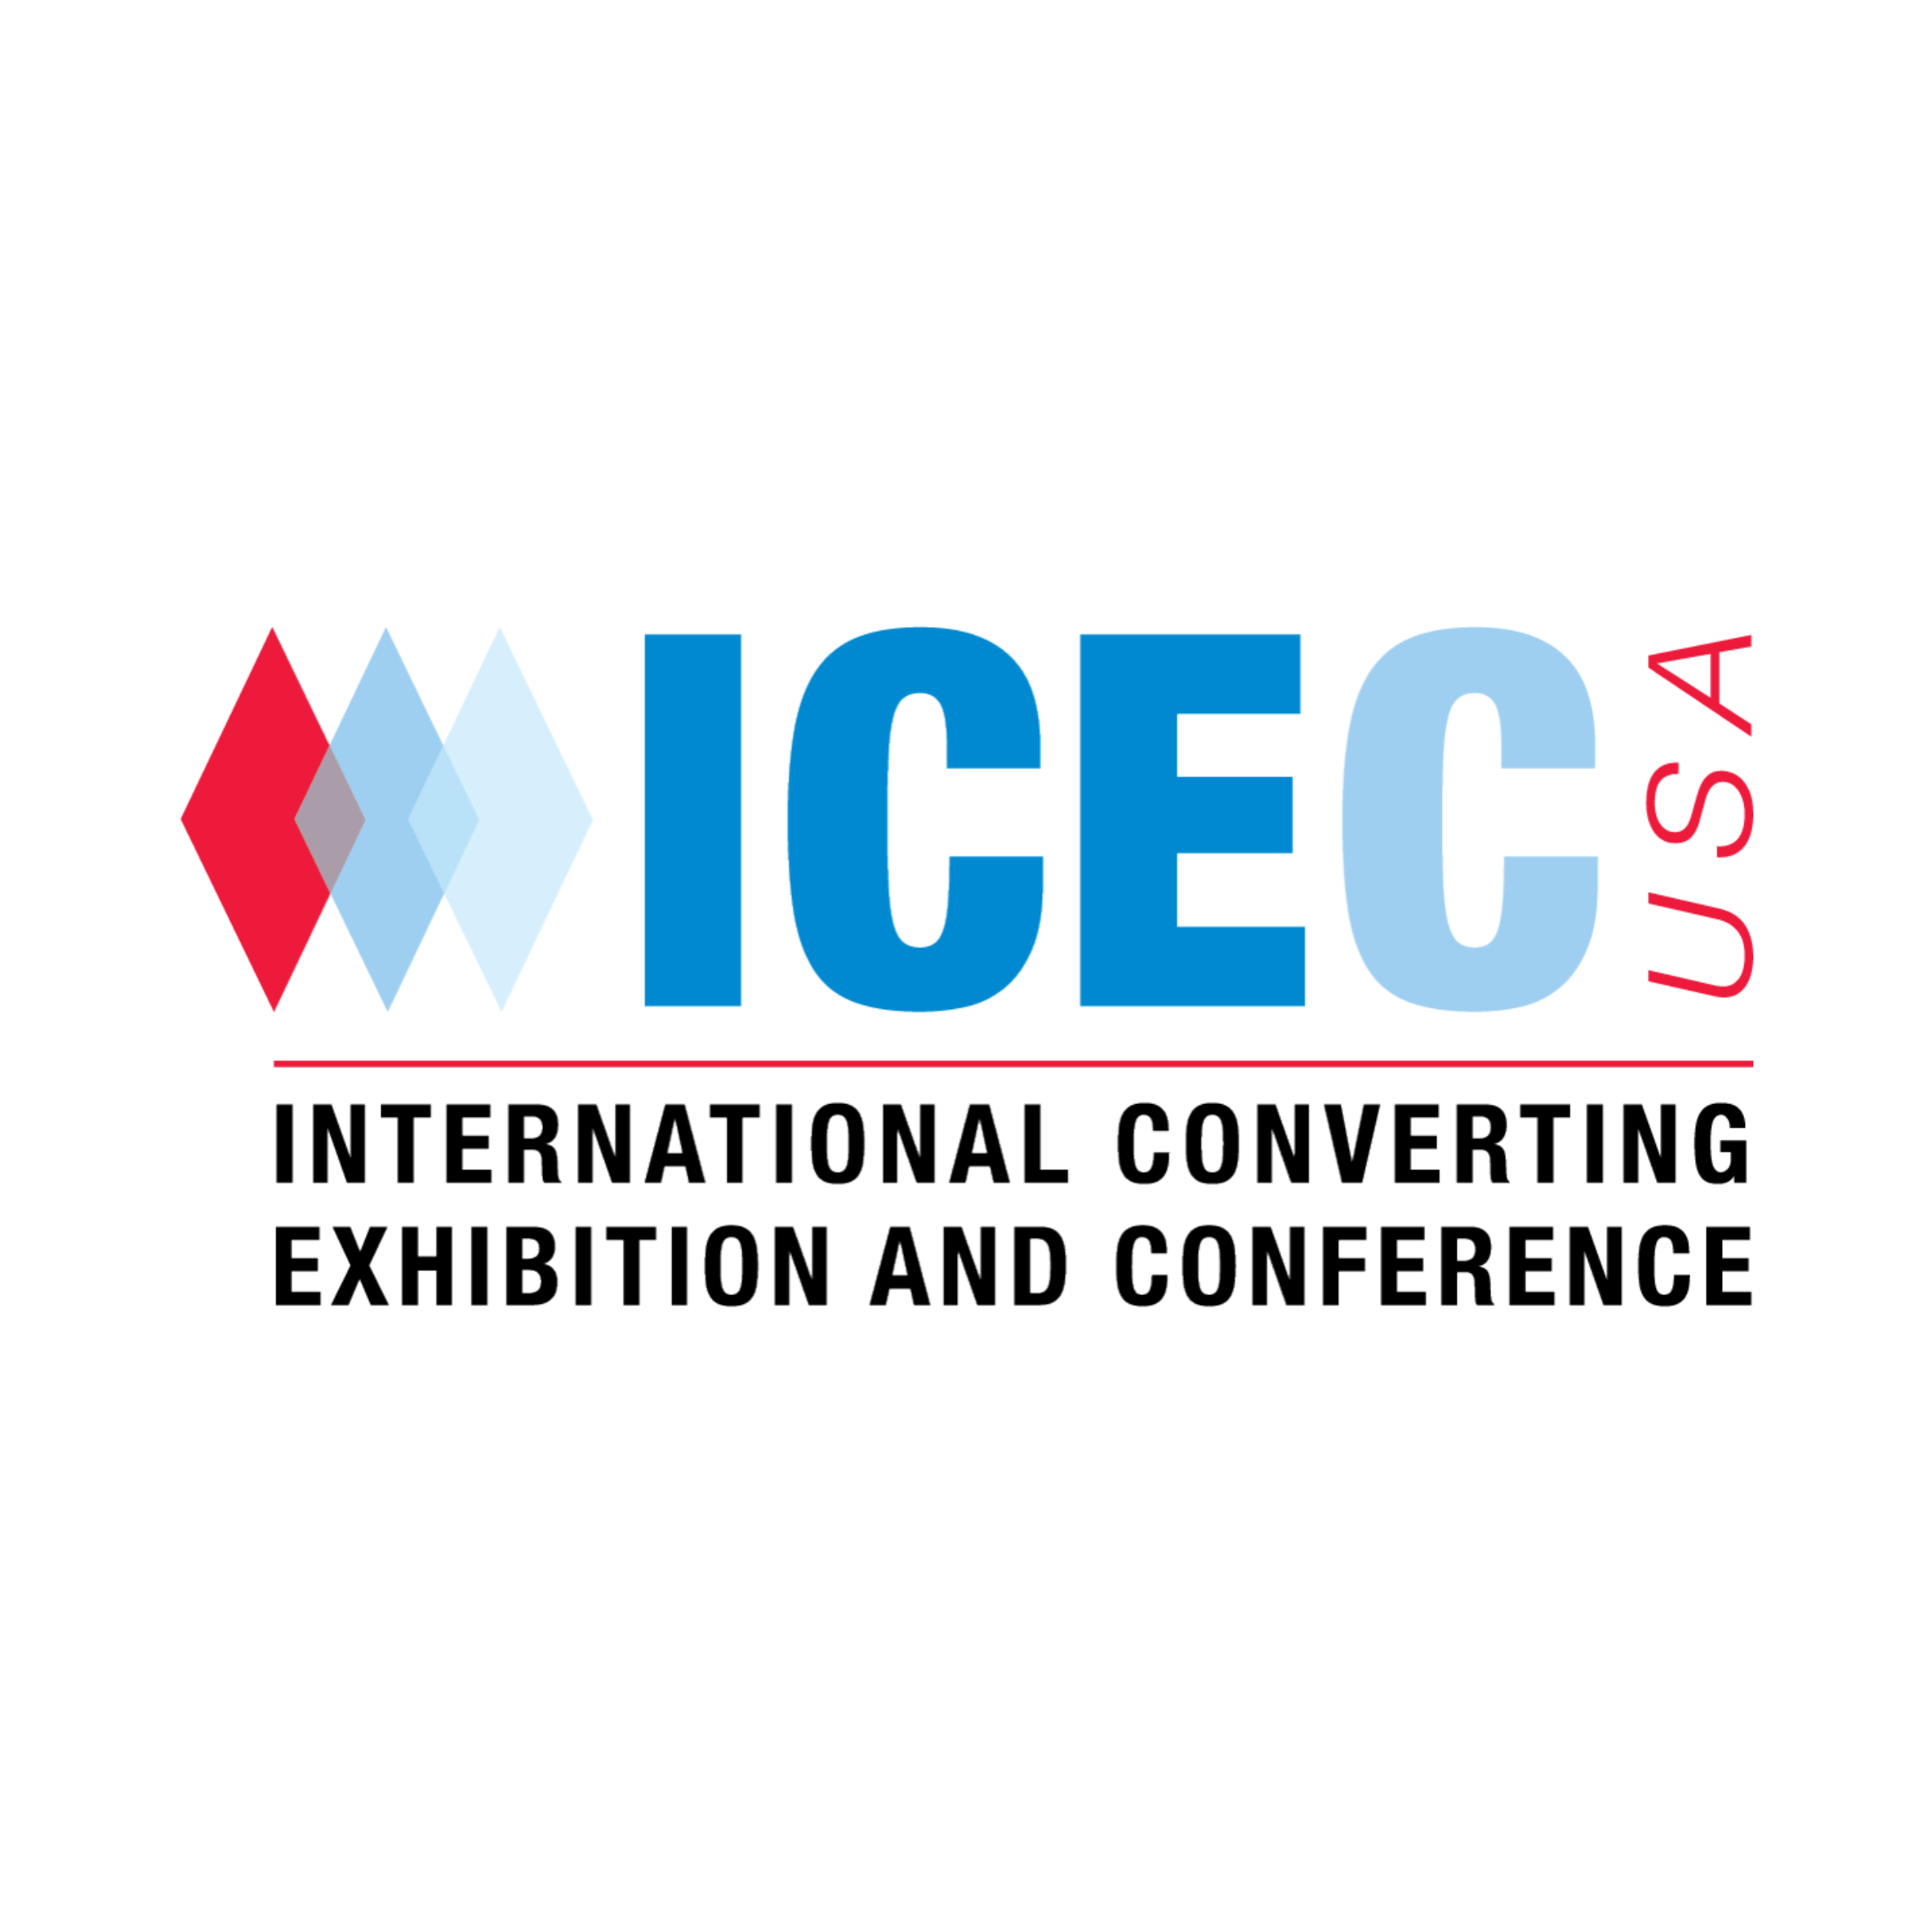 International Converting Exhibition & Conference (ICEC) USA